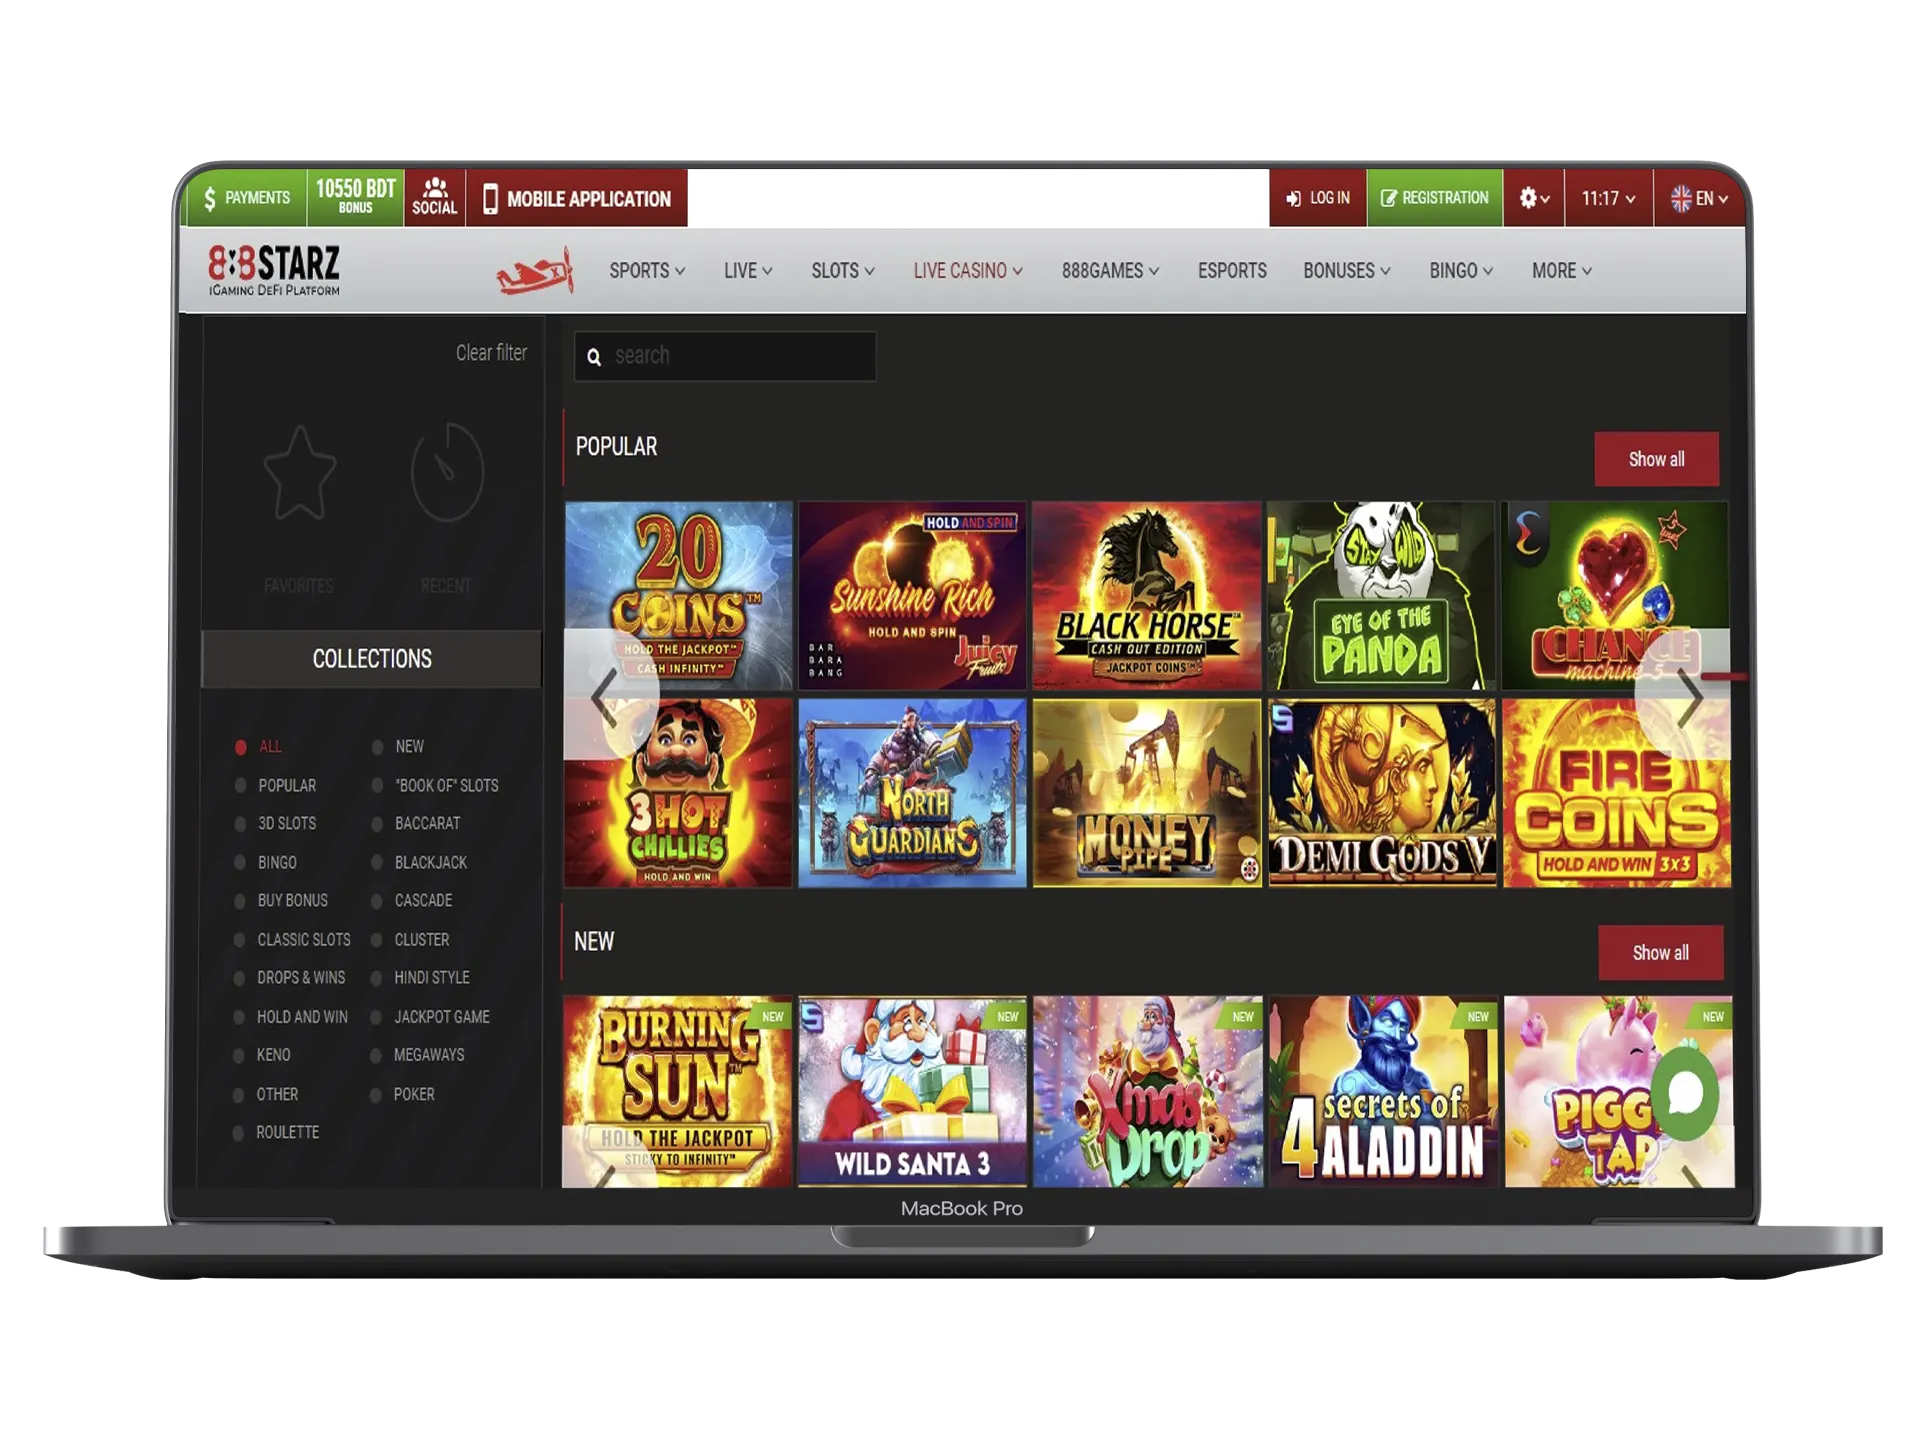 Take benefit of the special bonus, make a deposit and you can start playing at 888starz casino.